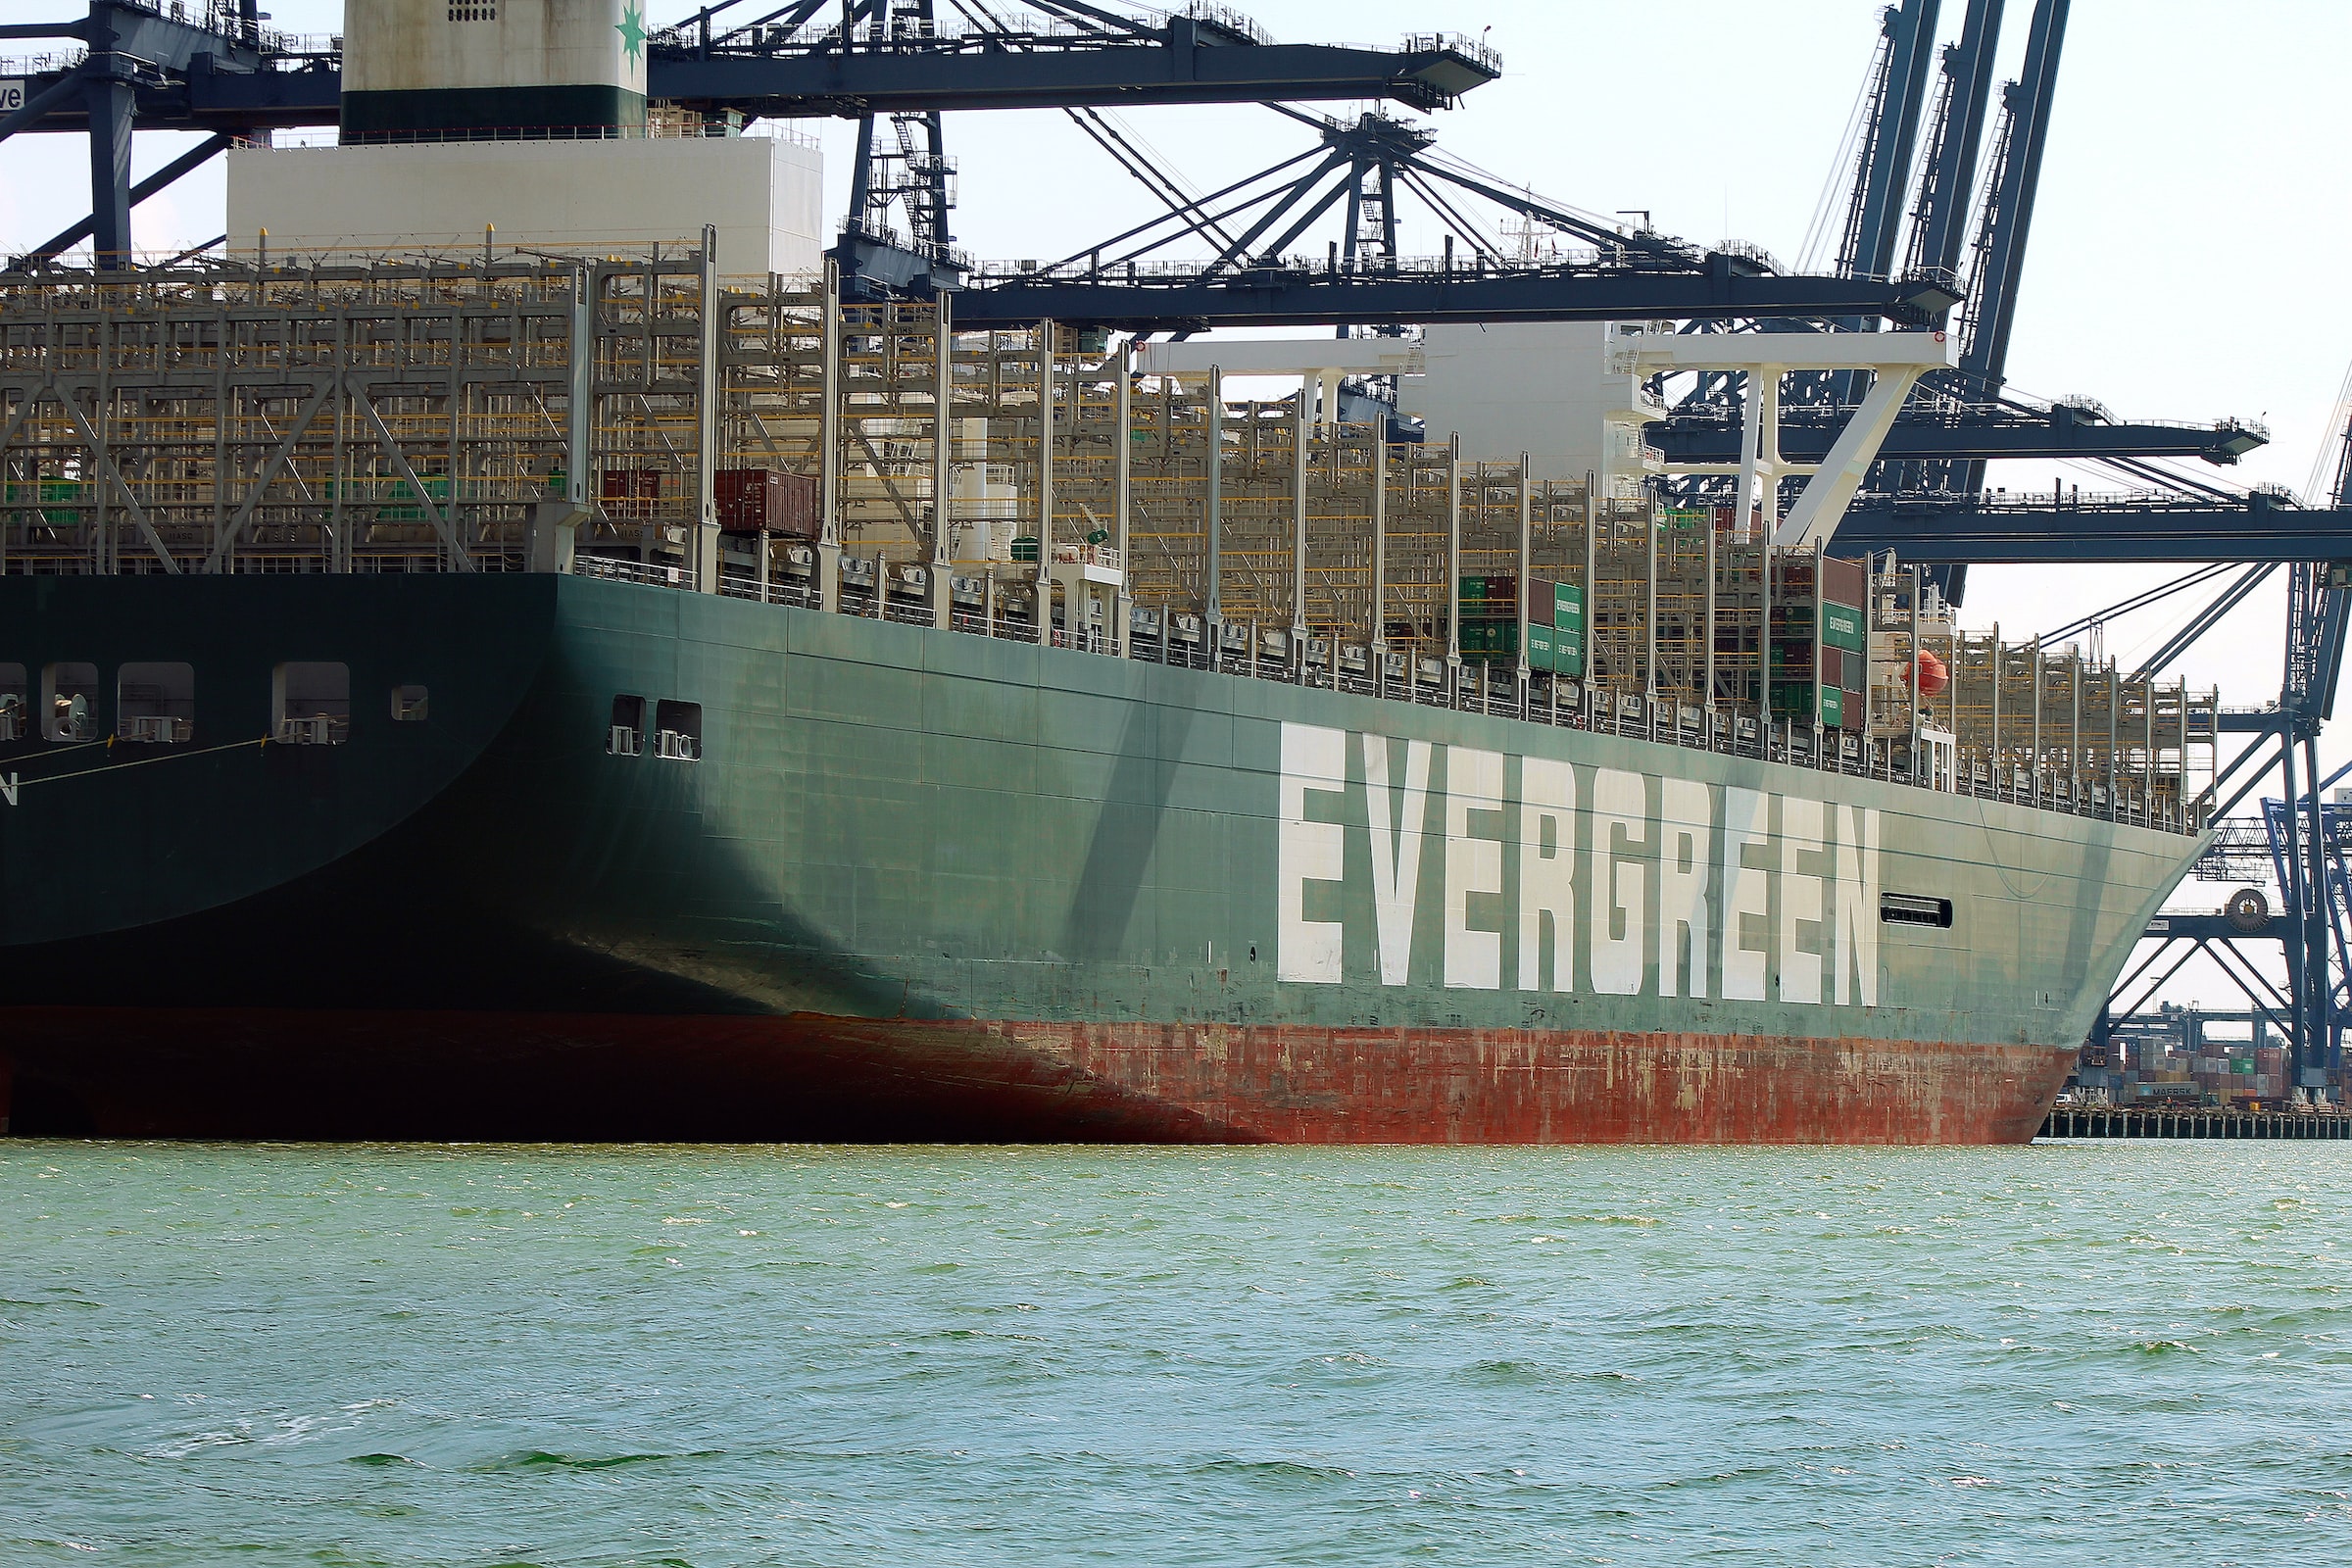 An image of a container ship at Felixstowe shipping port